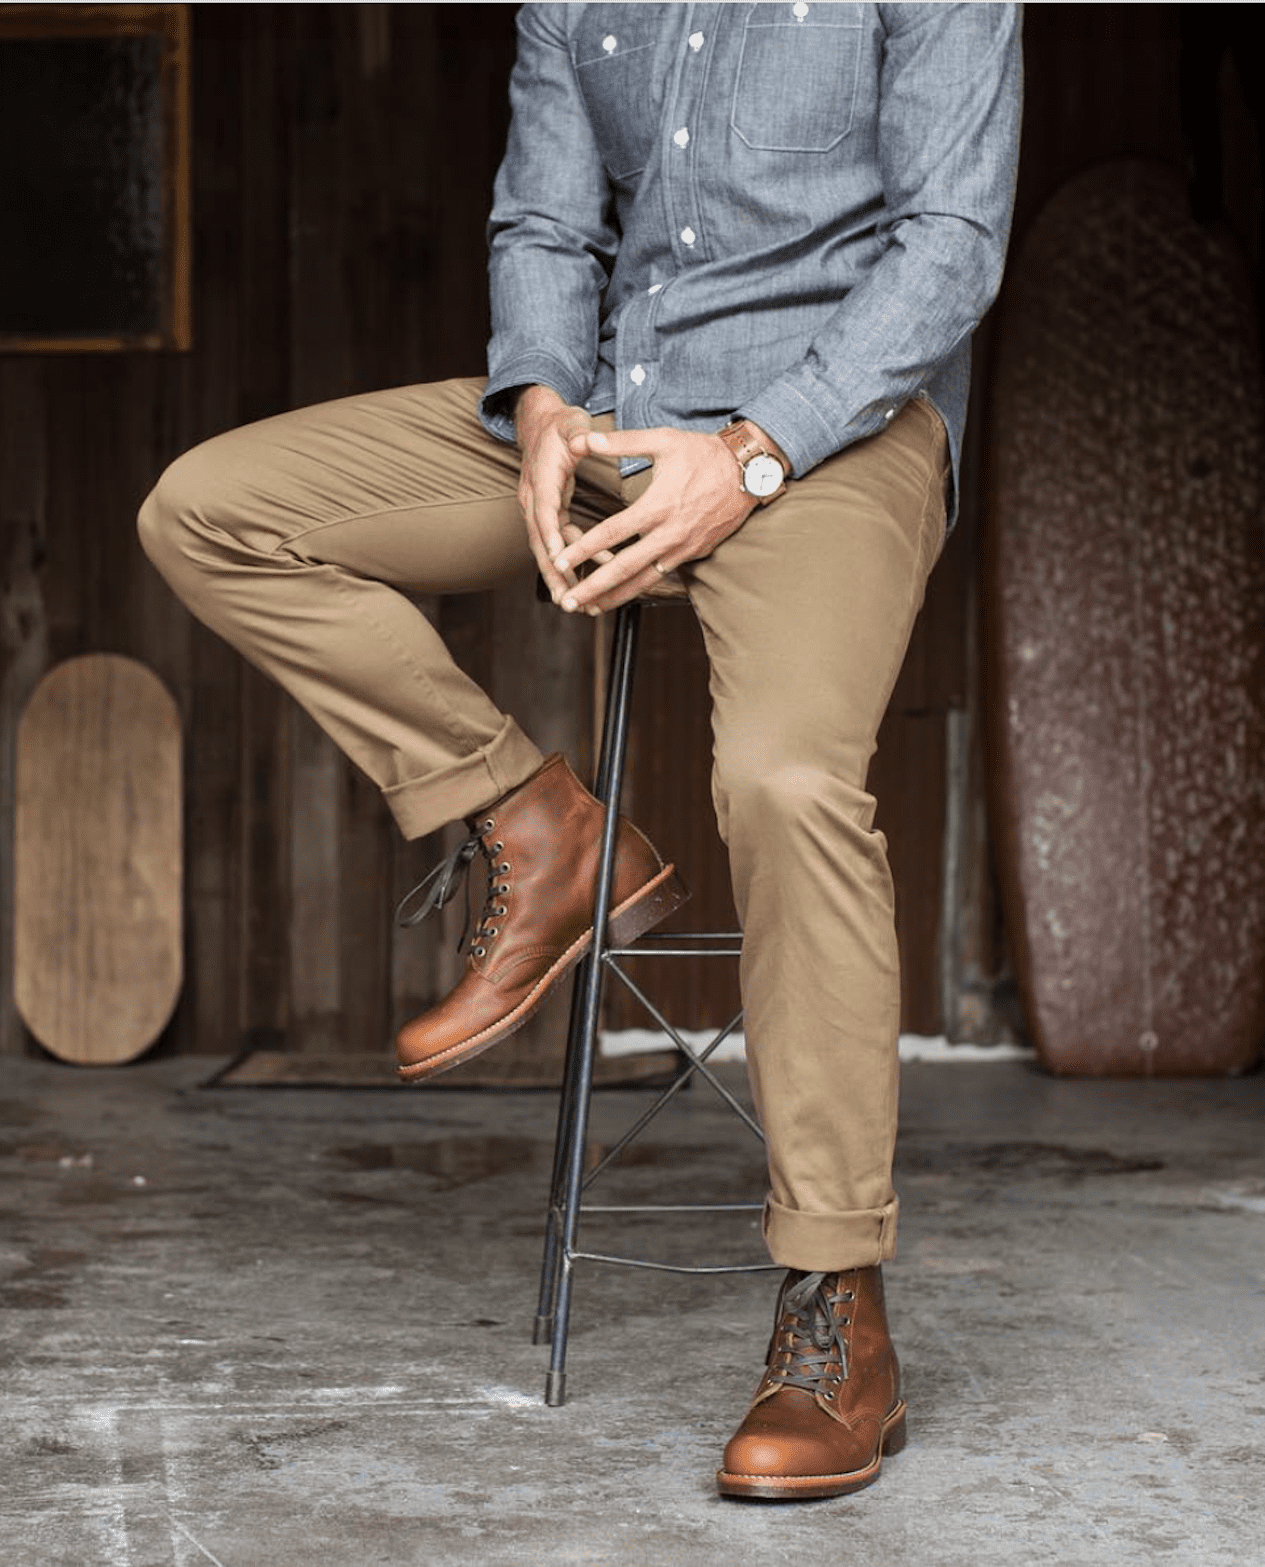 7 Must Have Chinos And Shirt Colors For 7 Different Looks This Season   Estilo masculino Moda masculina casual Vestuário masculino